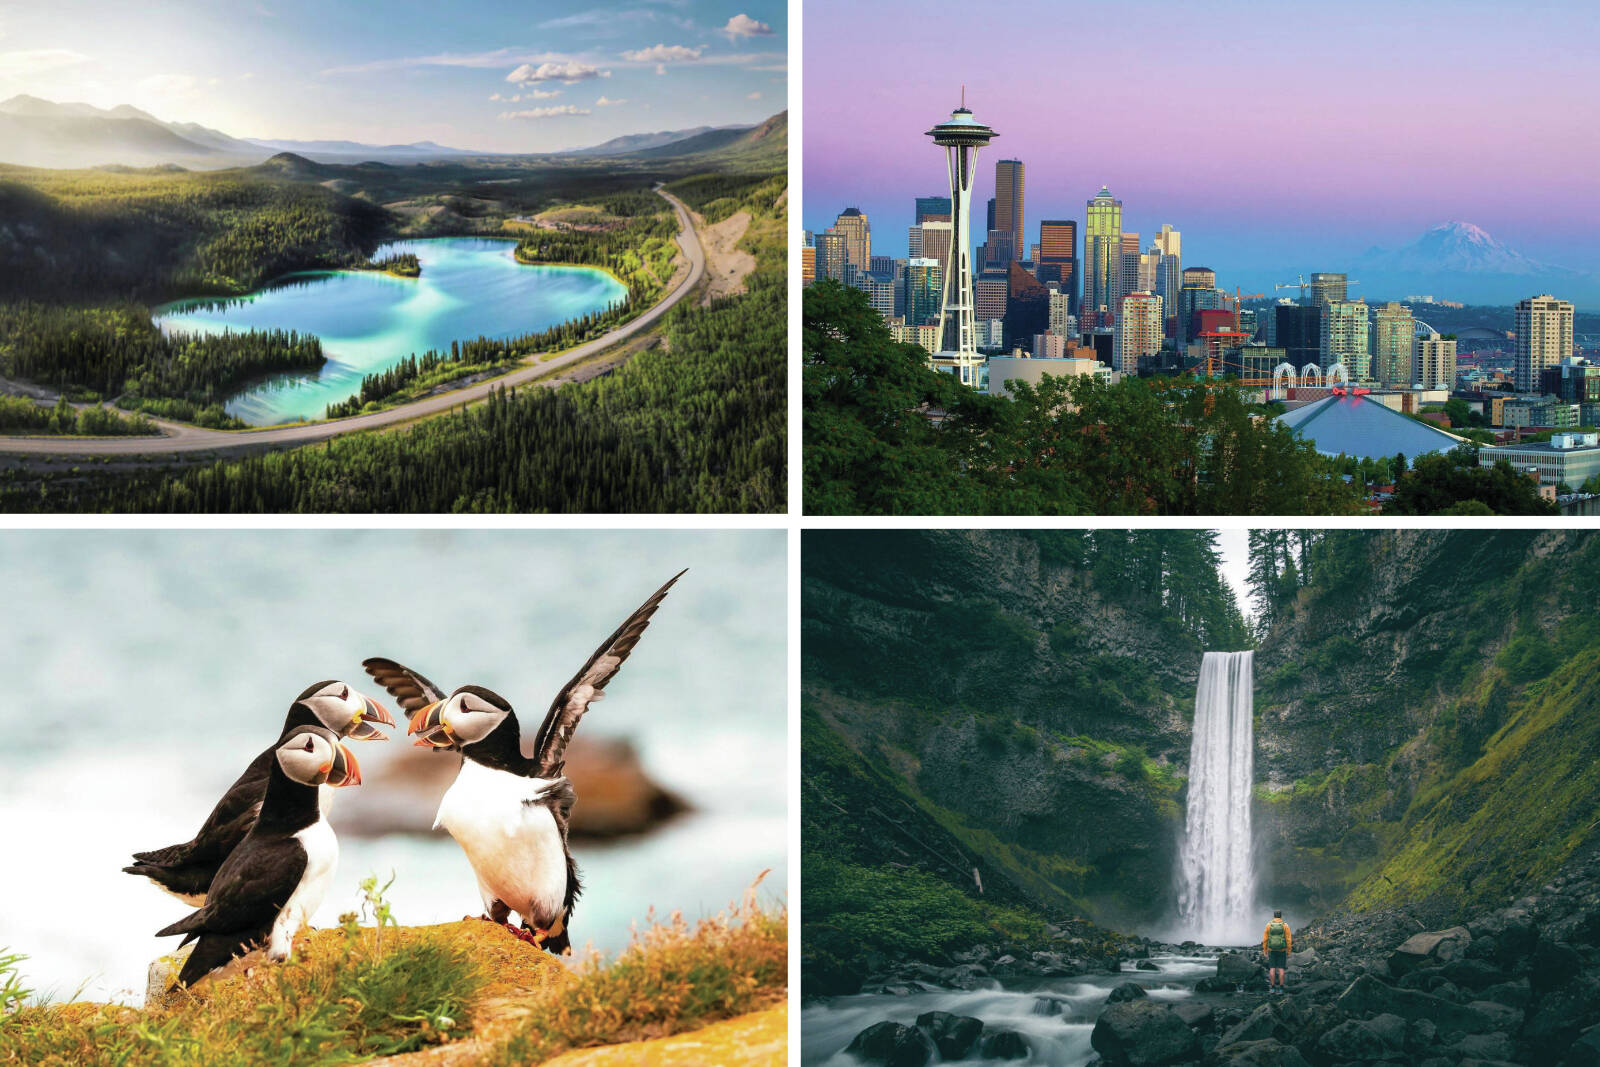 The 2022 Amateur Photographer of the Year winners, from top left: Grand prize winner: James Major/Emerald Lake, Yukon; First place: Ken McAllister/Seattle, Wash.; People’s Choice: Julian Koerrenz/Brandywine Falls, near Whistler; APOTY Second place: Harold Feiertag/Atlantic Puffins, Elliston, Nfld. Who will be crowned the 2023 Amateur Photographer of the Year?